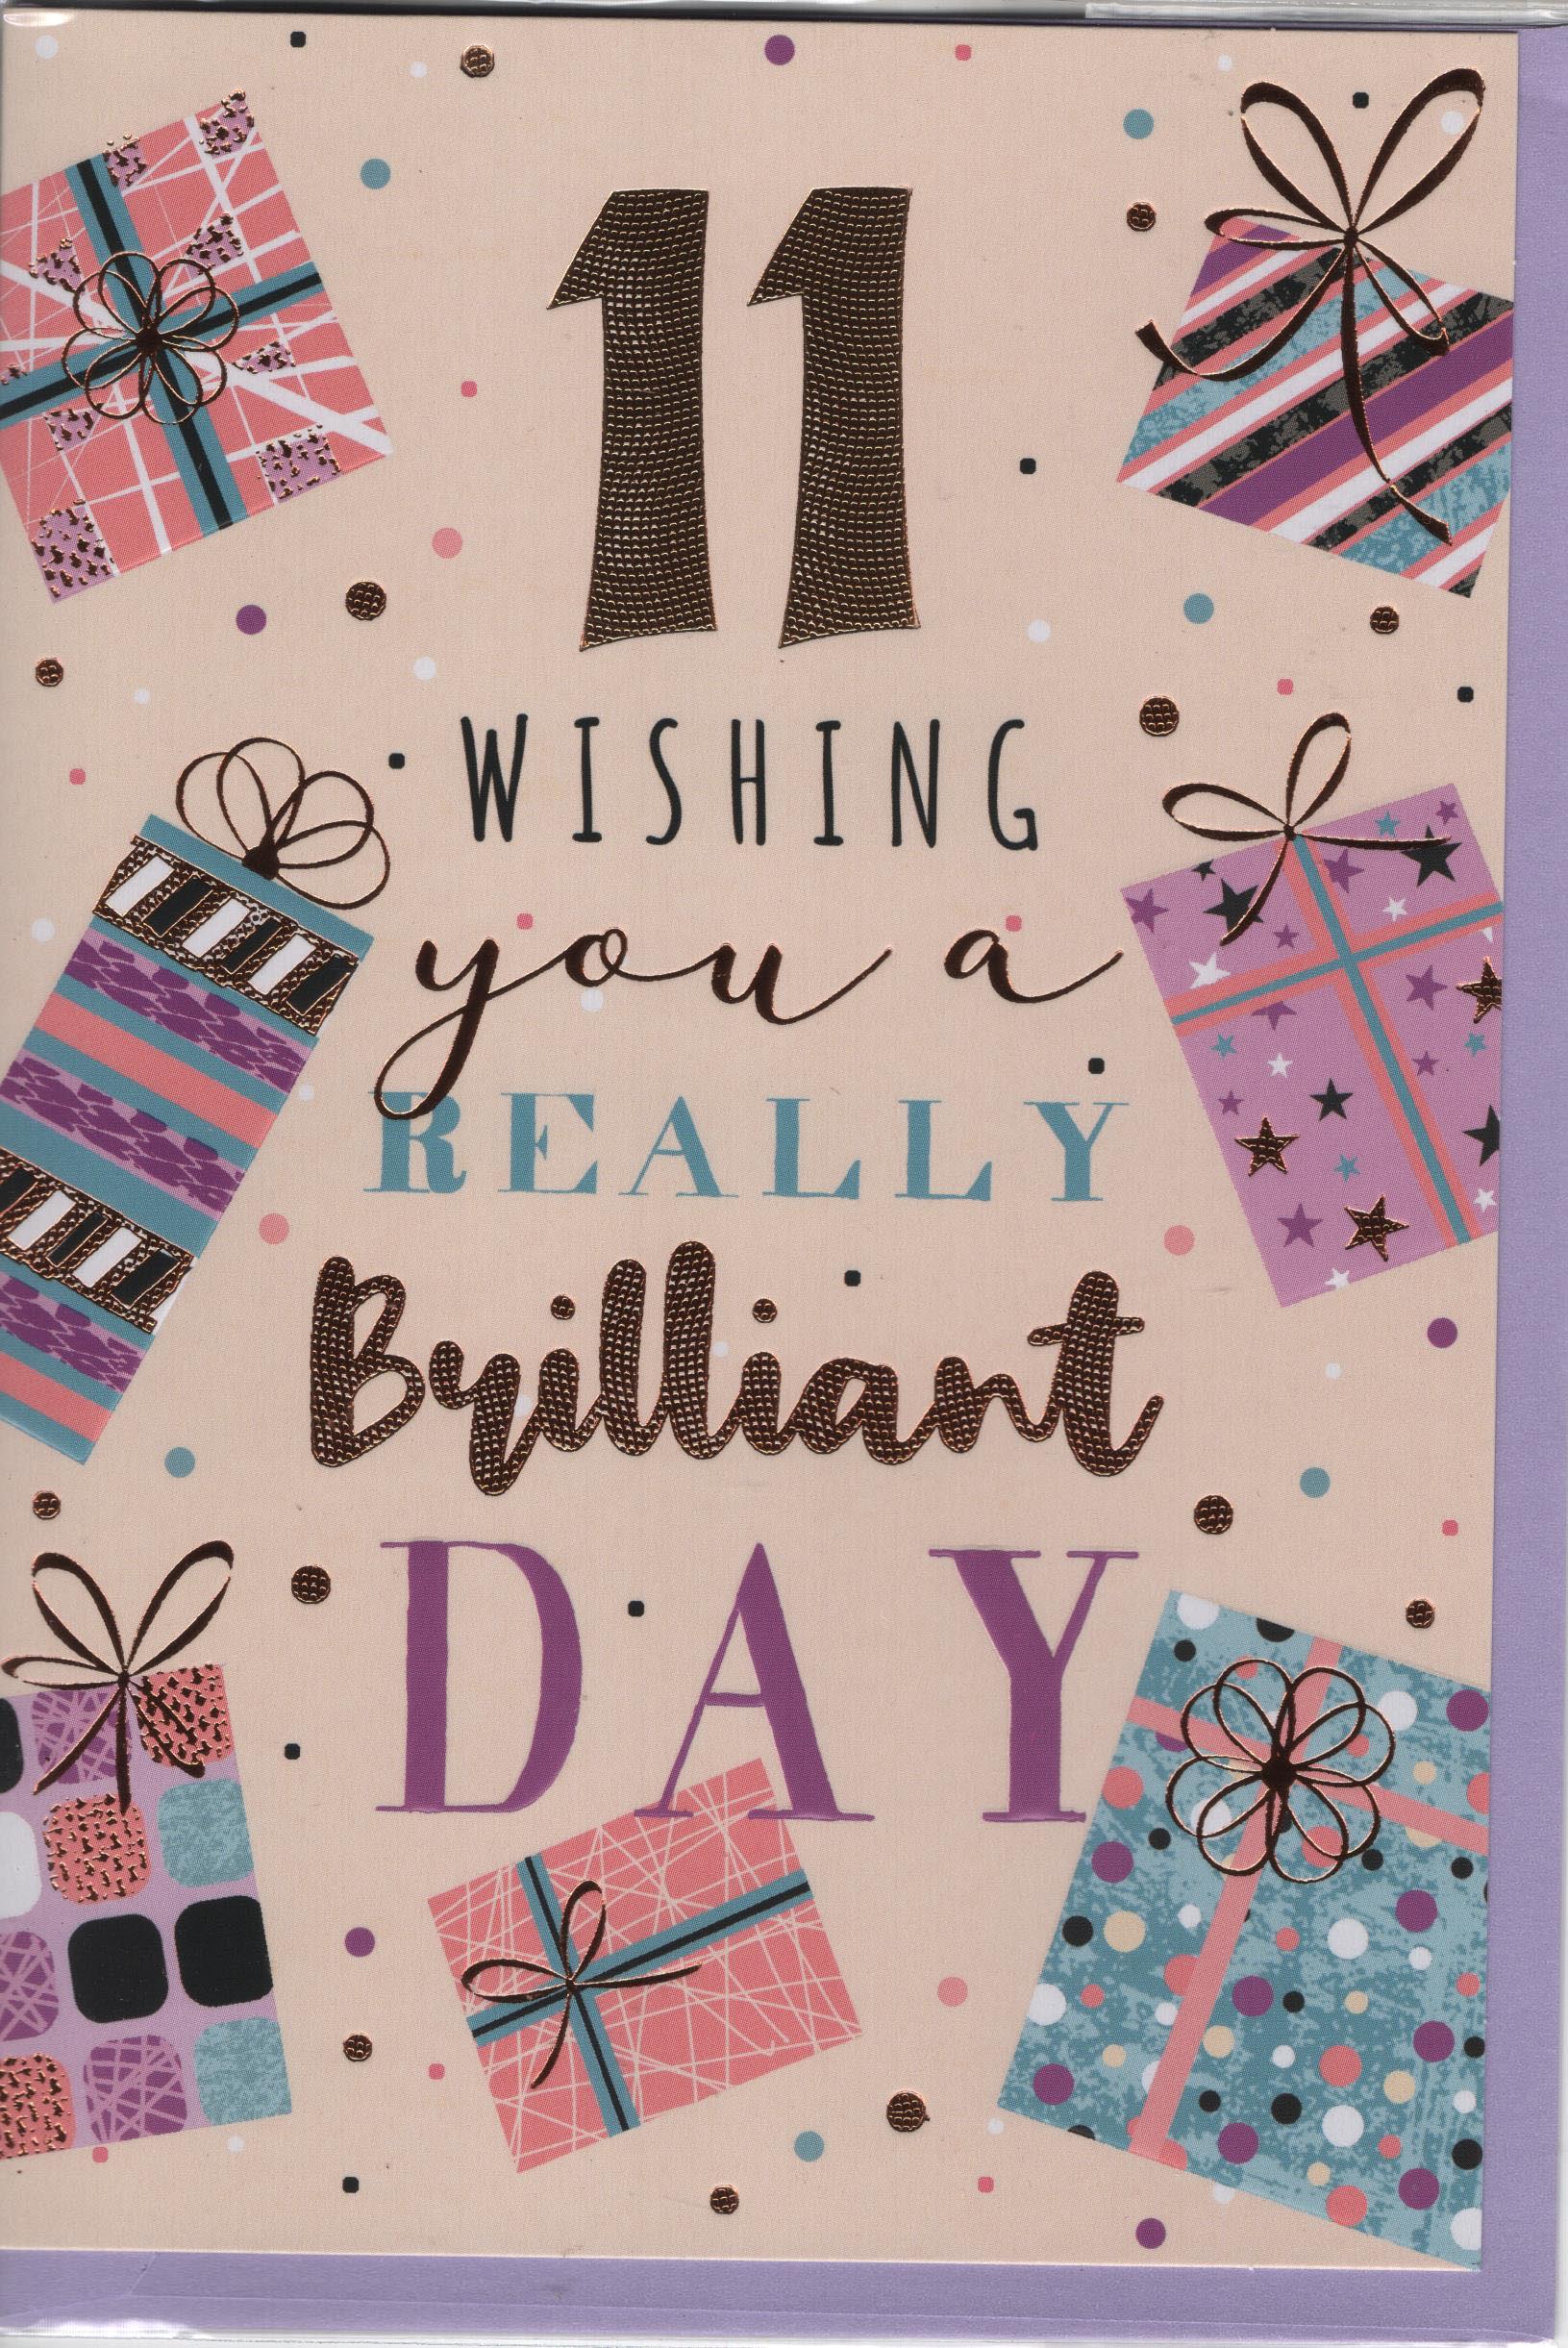 11 Wishing You a Really Brilliant Day